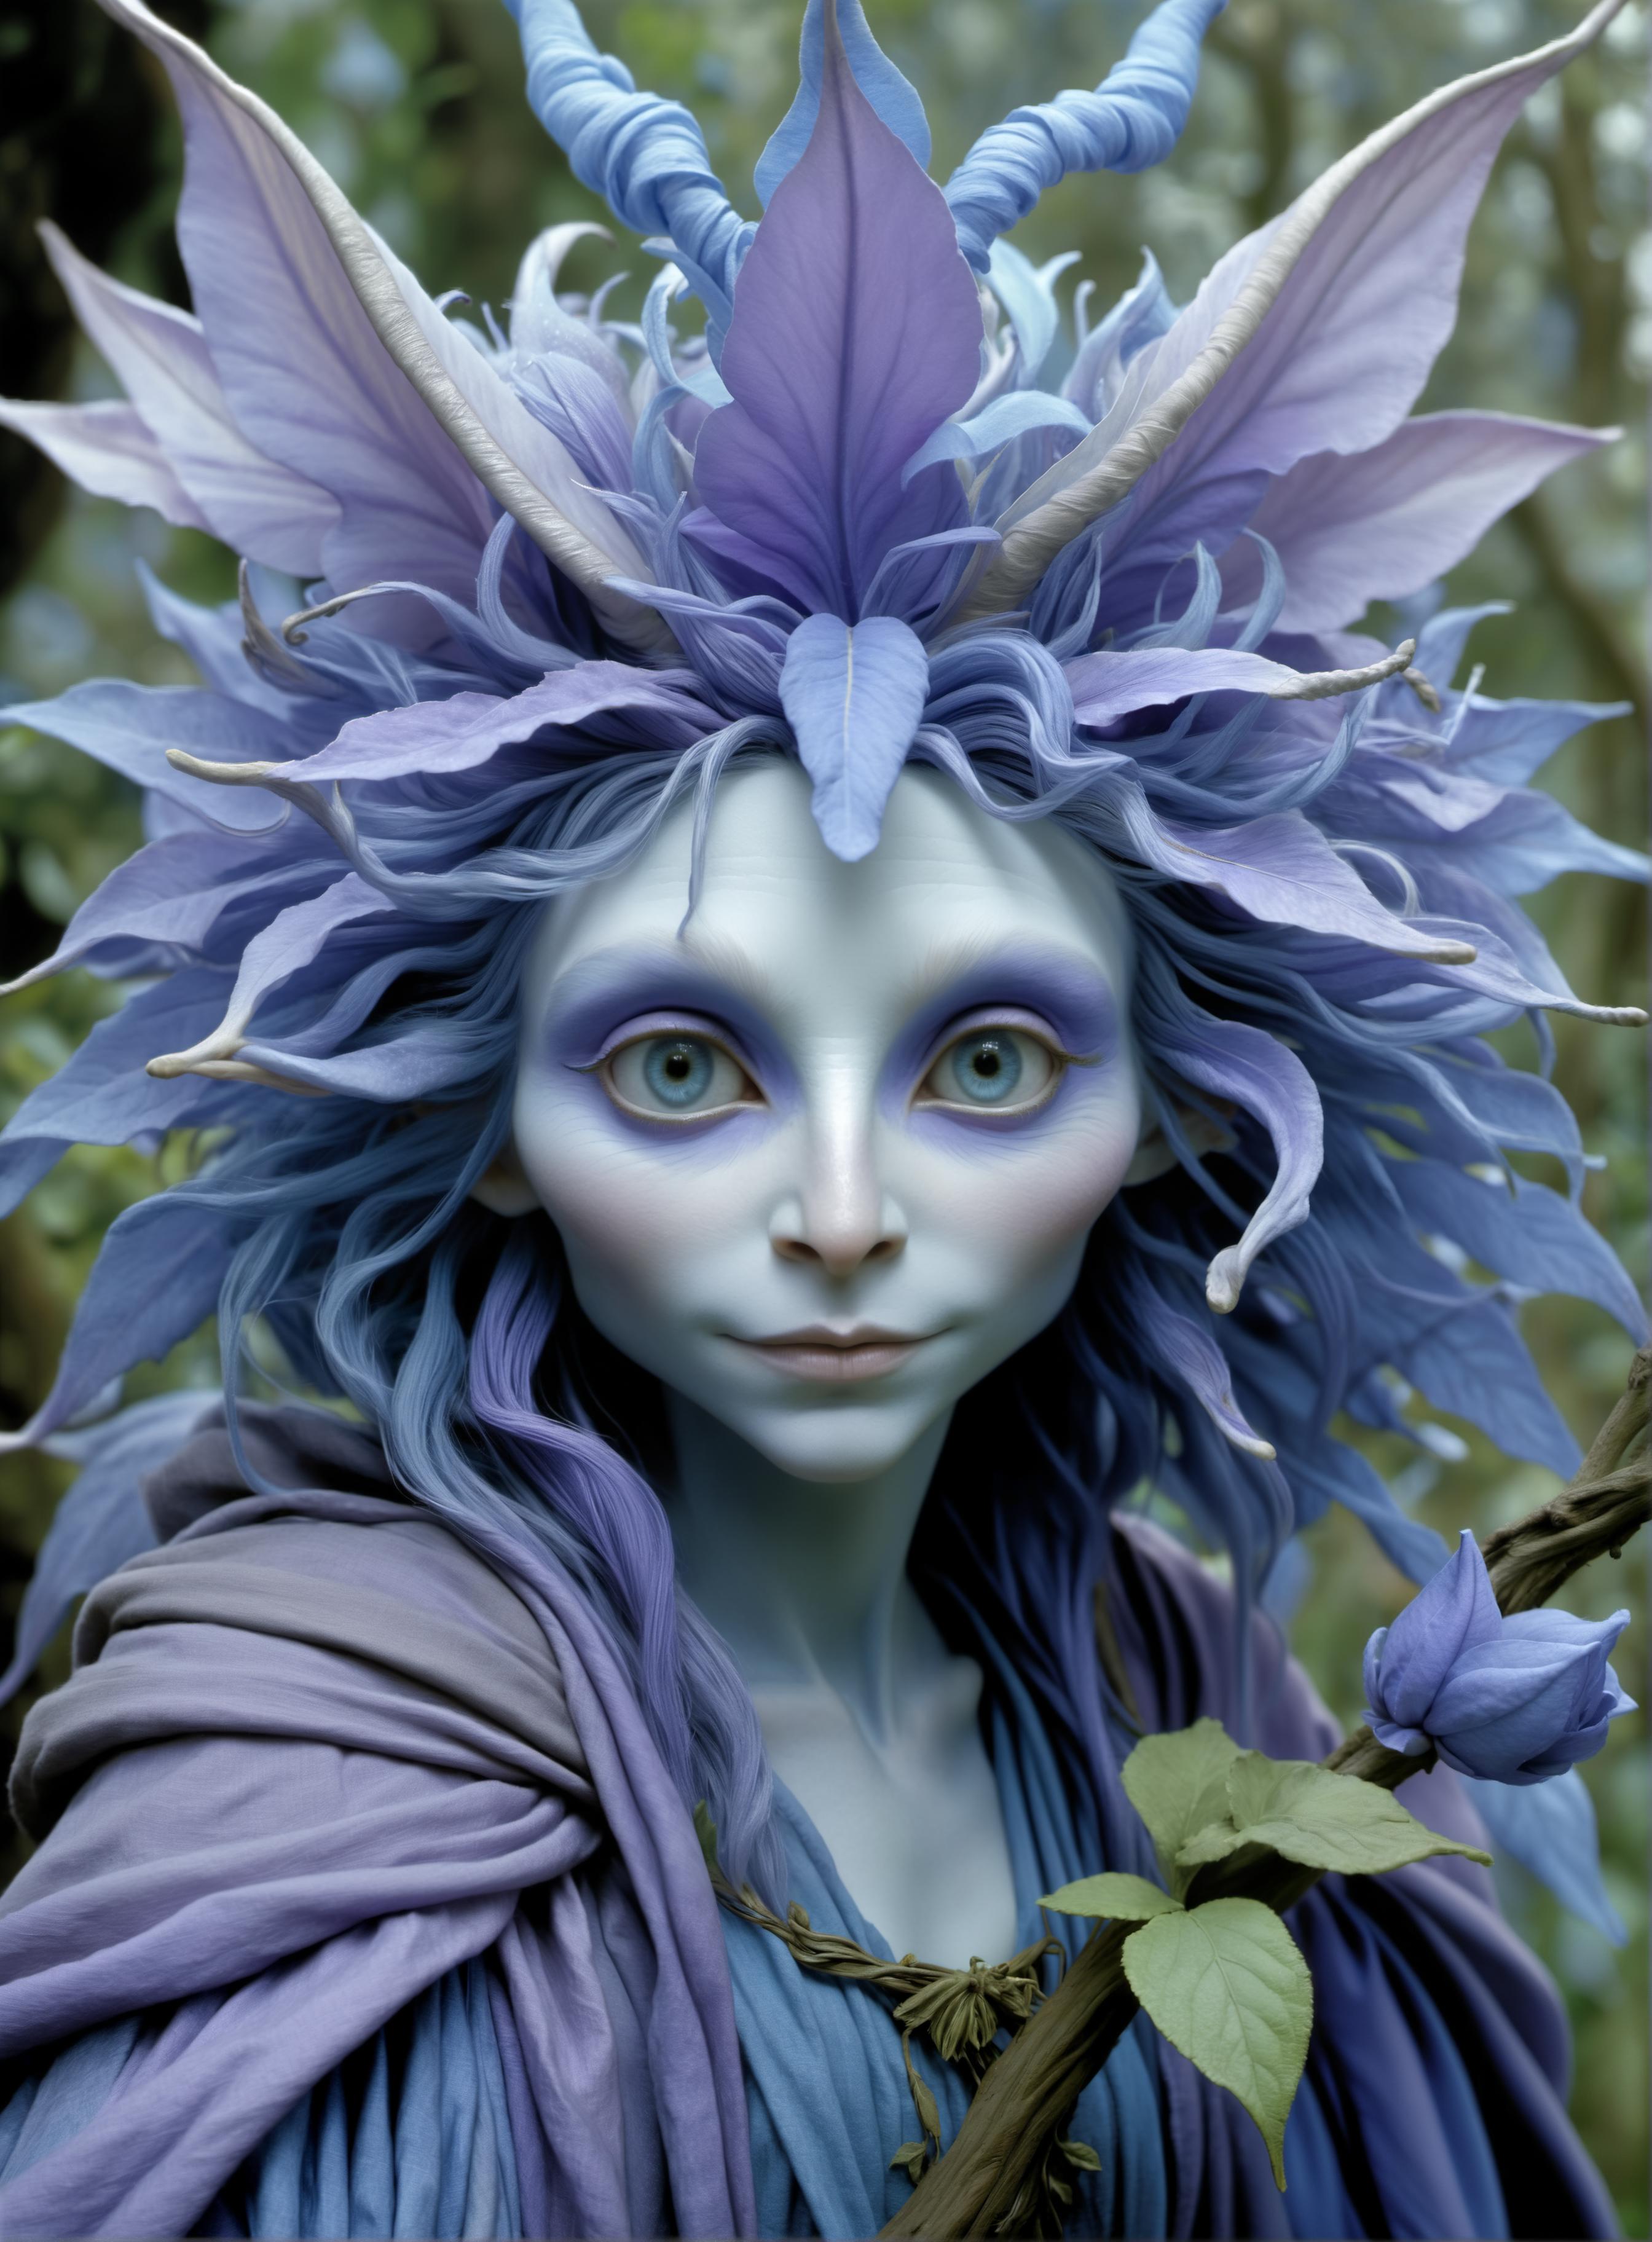 Wendy Froud Style image by LawyerFrank